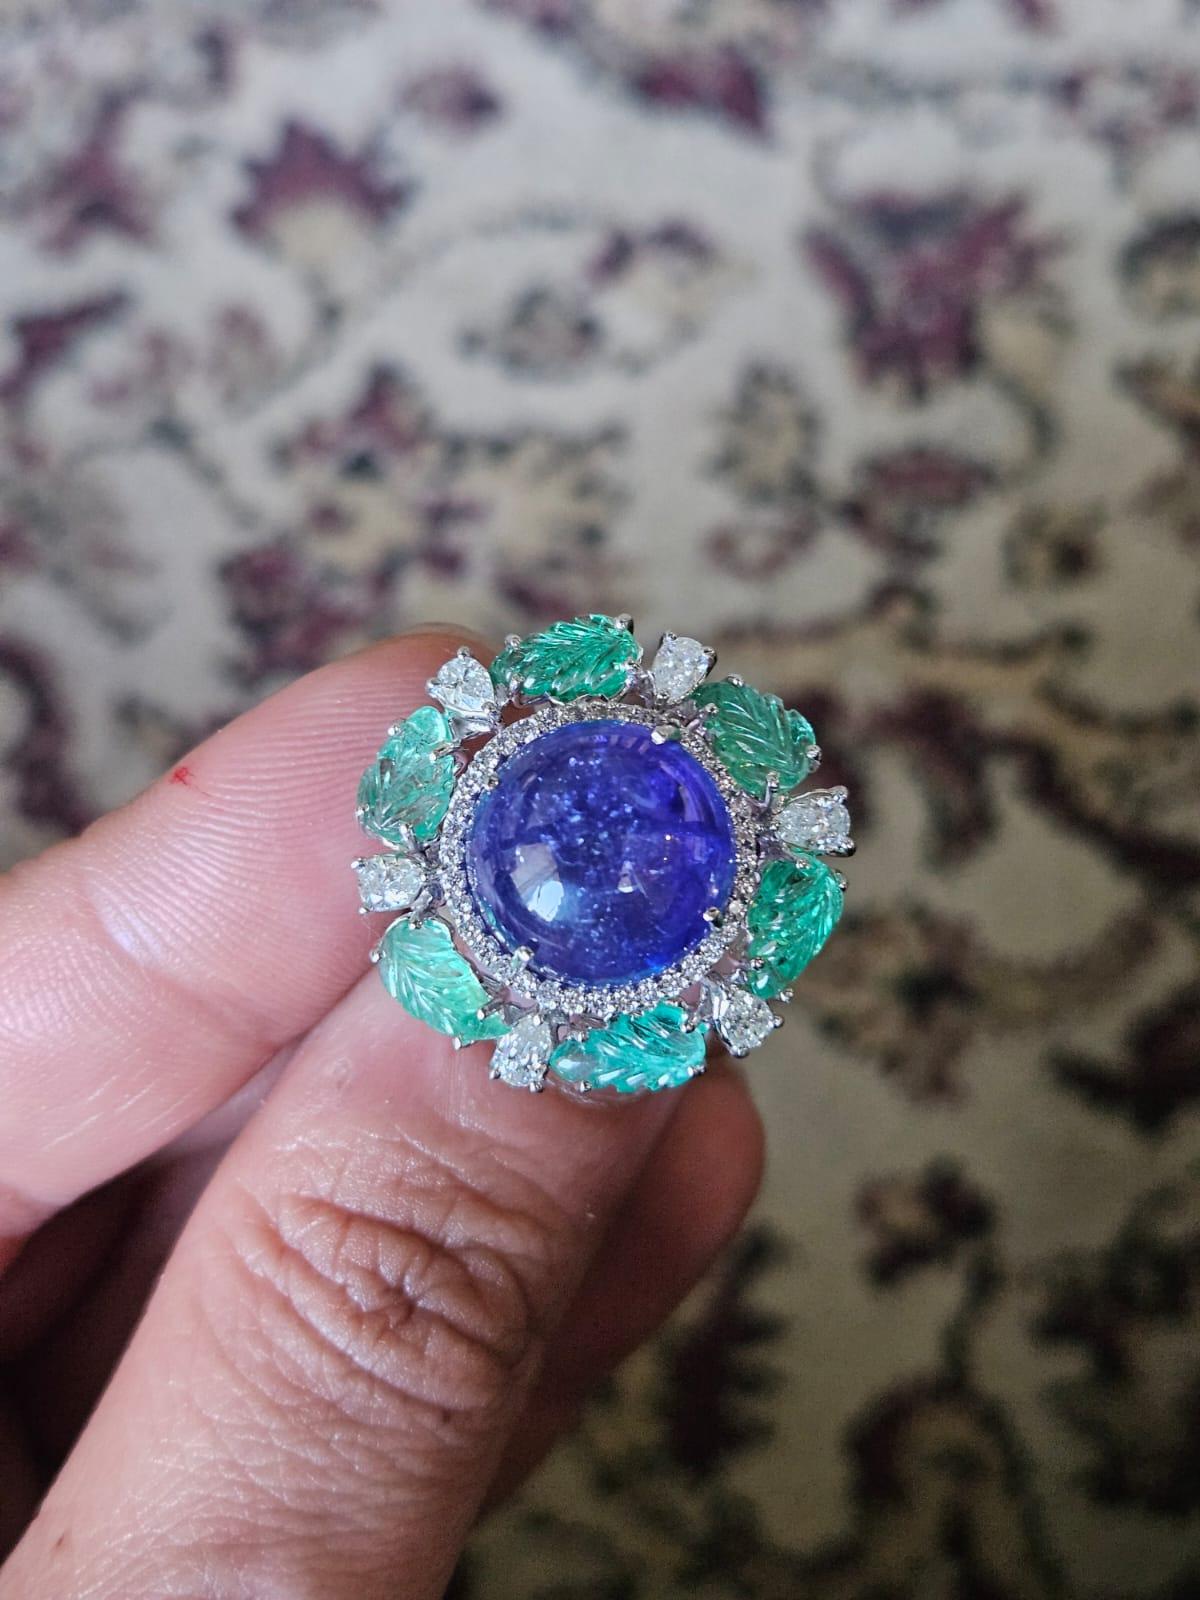 A very gorgeous and beautiful, Tanzanite & Emerald Cocktail Ring set in 18K White Gold & Diamonds. The weight of the Tanzanite Cabochon is 12.59 carats. The Tanzanite is responsibly sourced from Tanzania. The weight of the carved Emeralds is 2.70